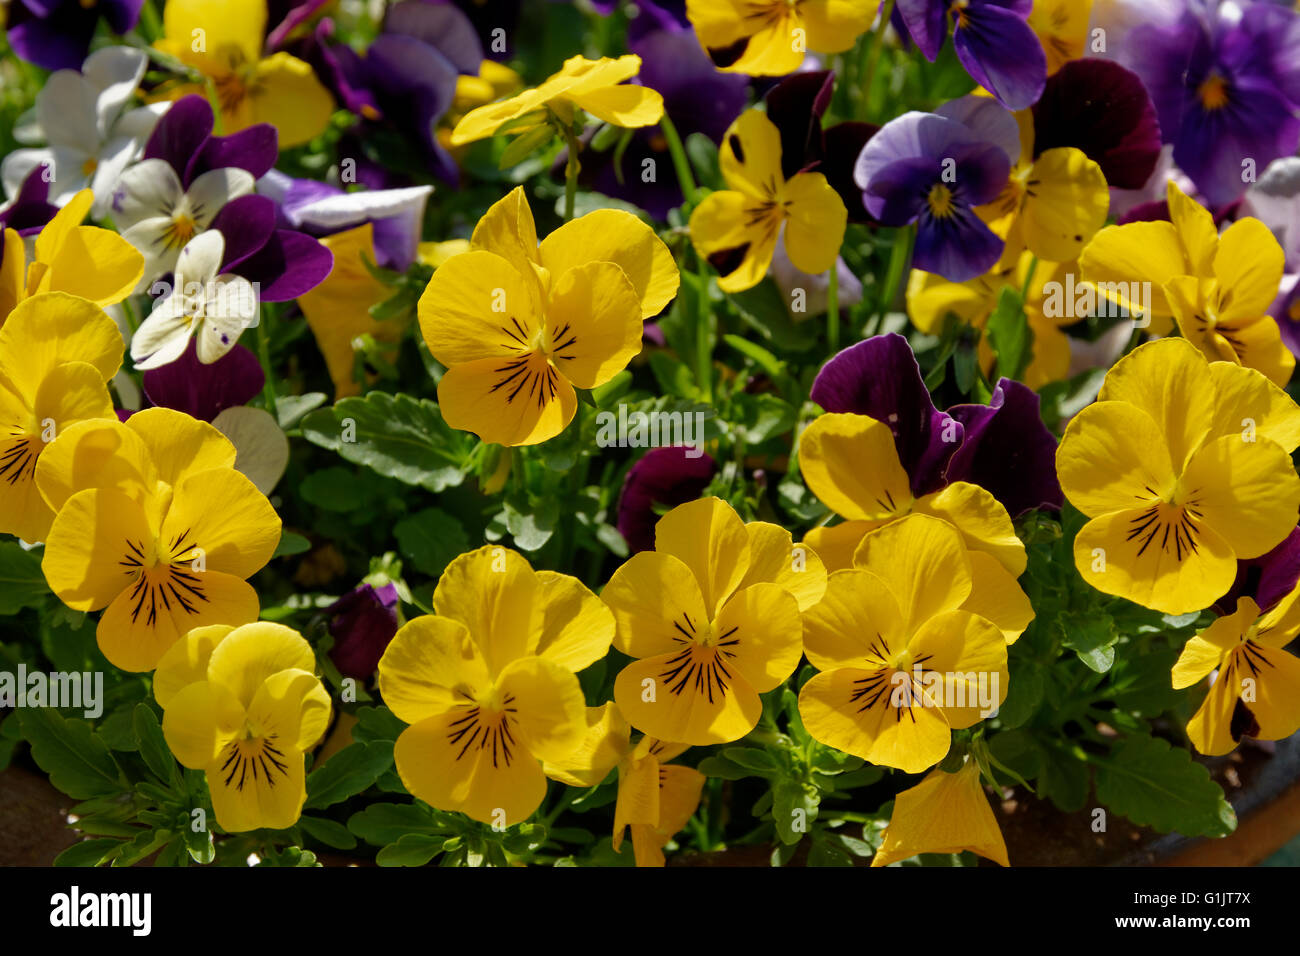 Yellow and Violet Pansies Stock Photo